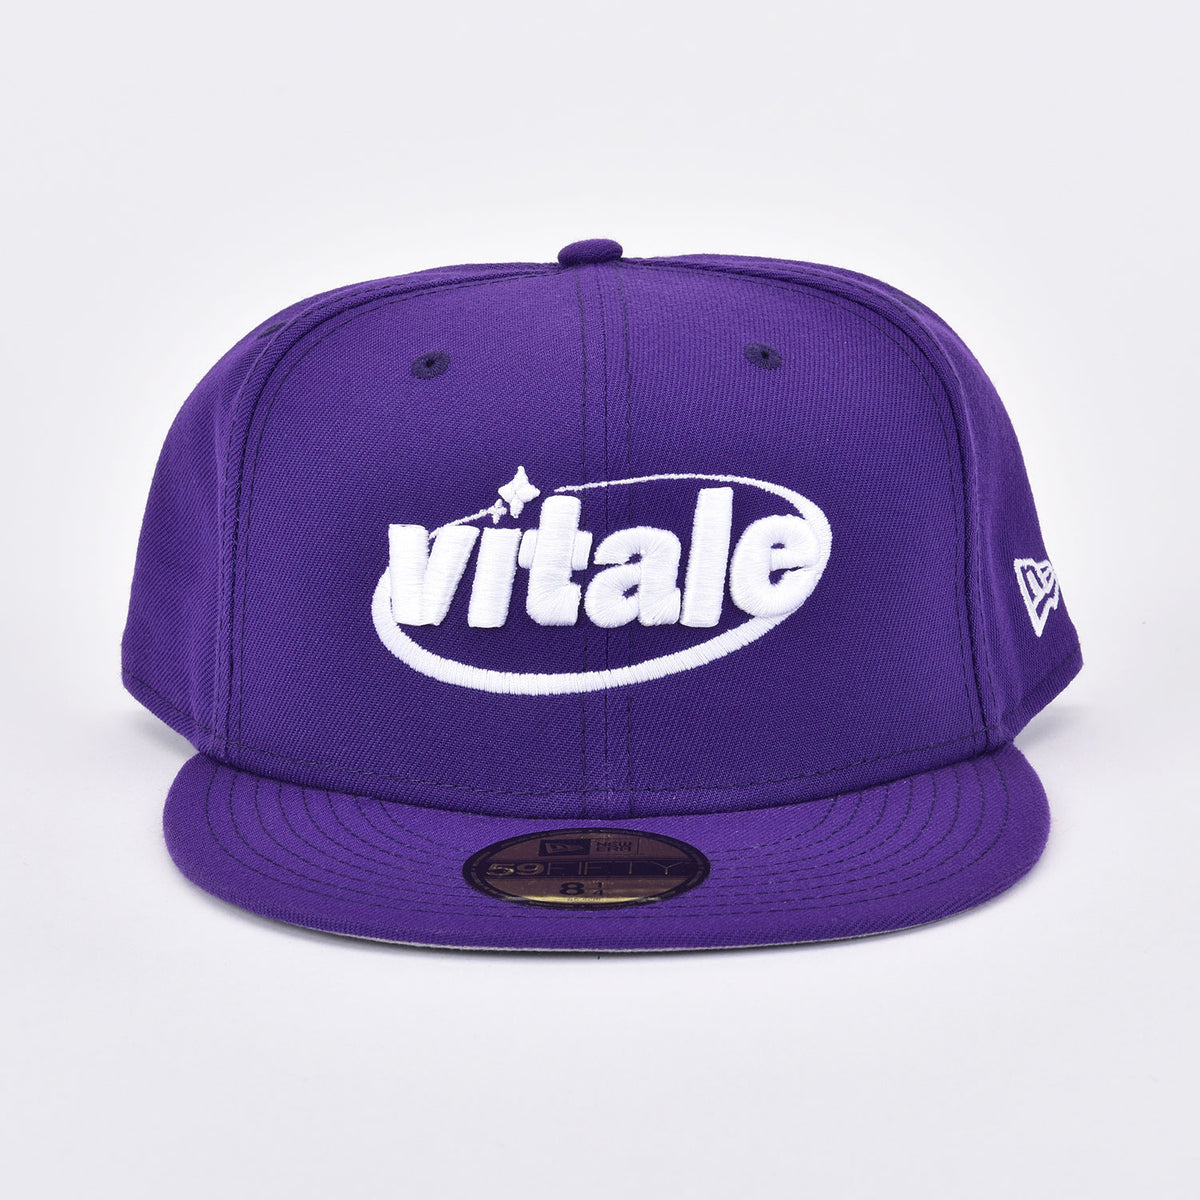 Vstreet Fitted Cap Purple (S)